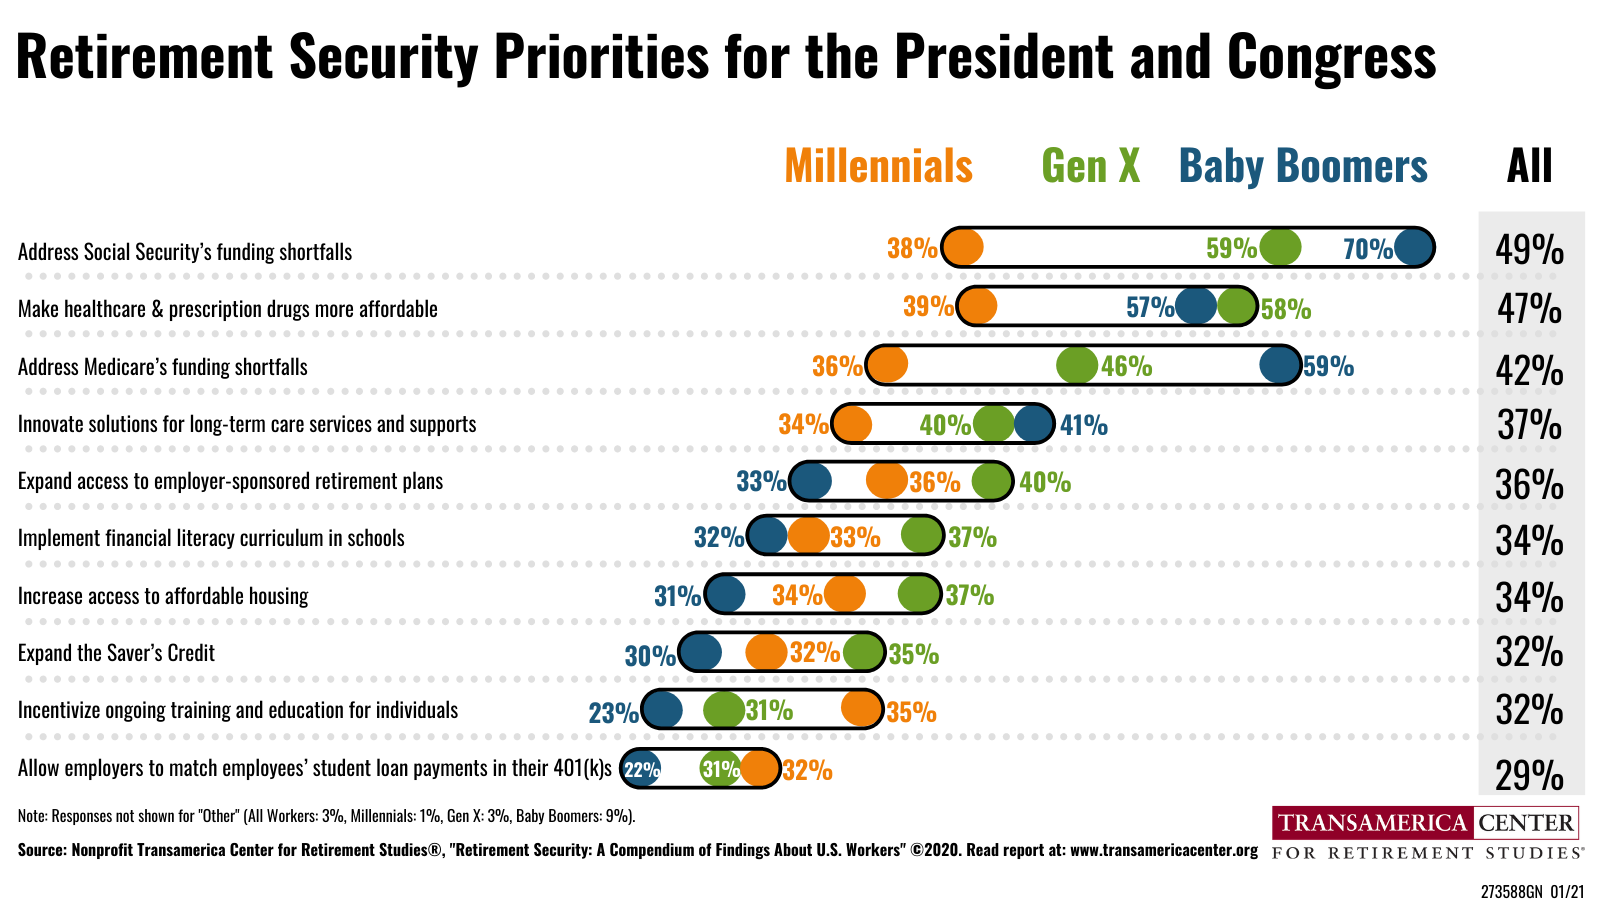 Generations Retirement Security Priorities | TCRS 20th Annual Retirement Survey